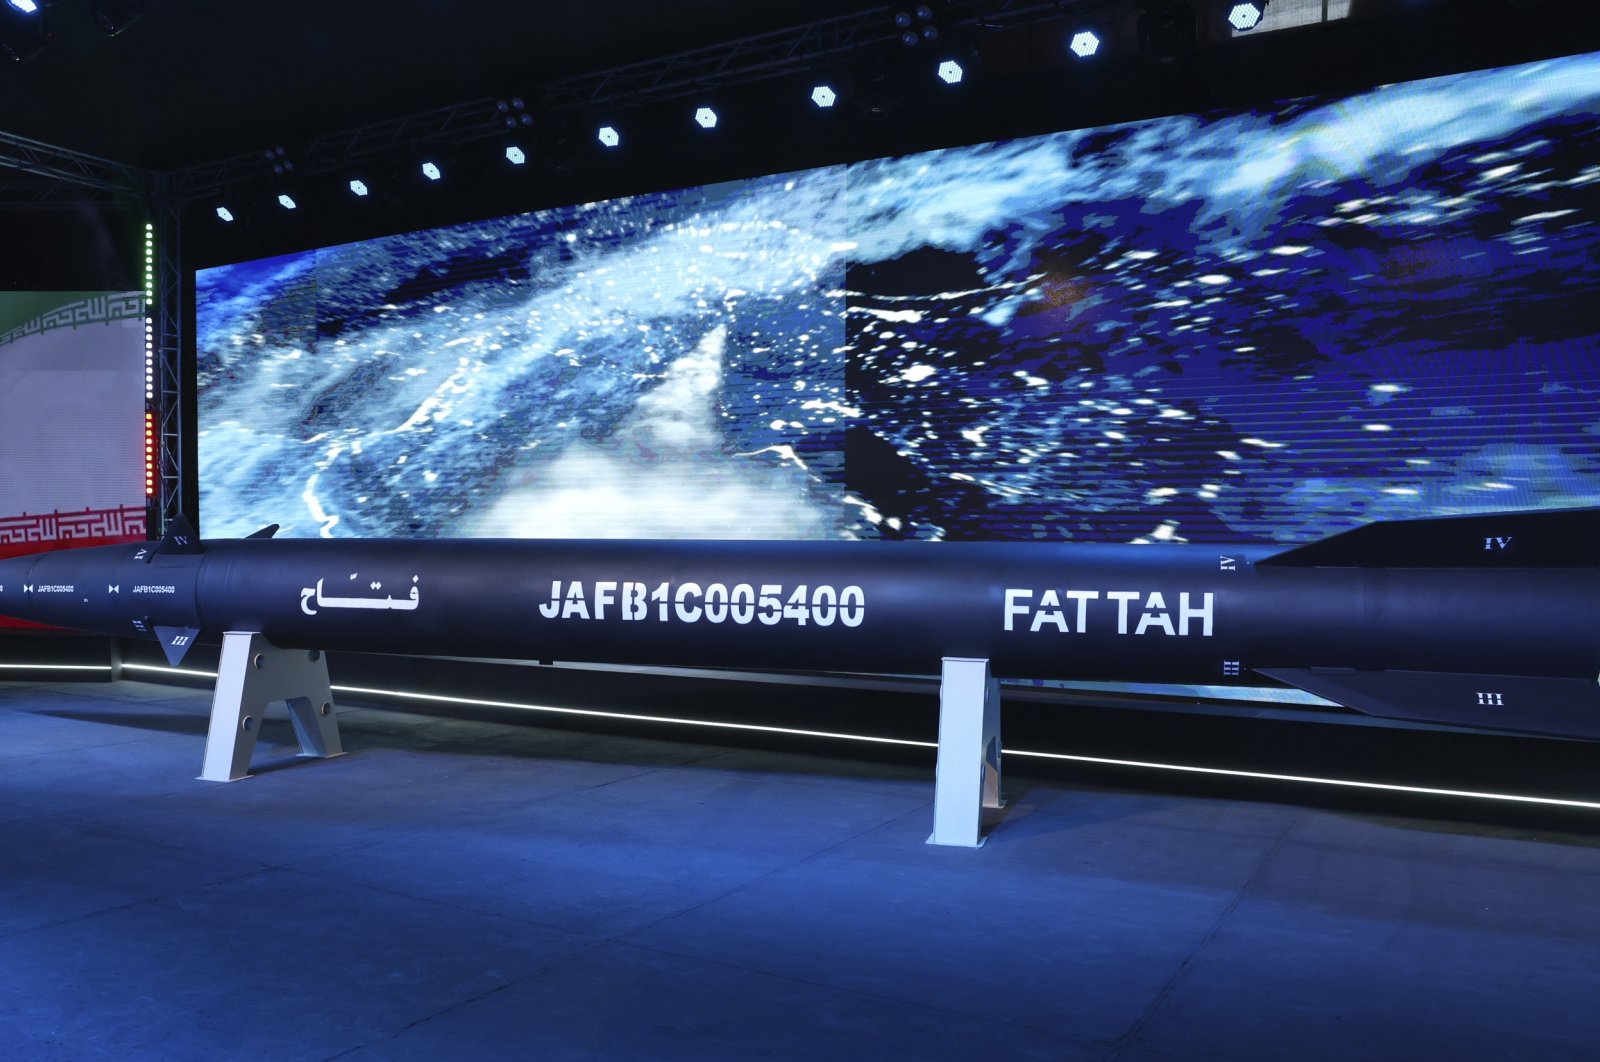 Fattah missile is unveiled in a ceremony in Tehran, Iran, June 6, 2023. (AP Photo)